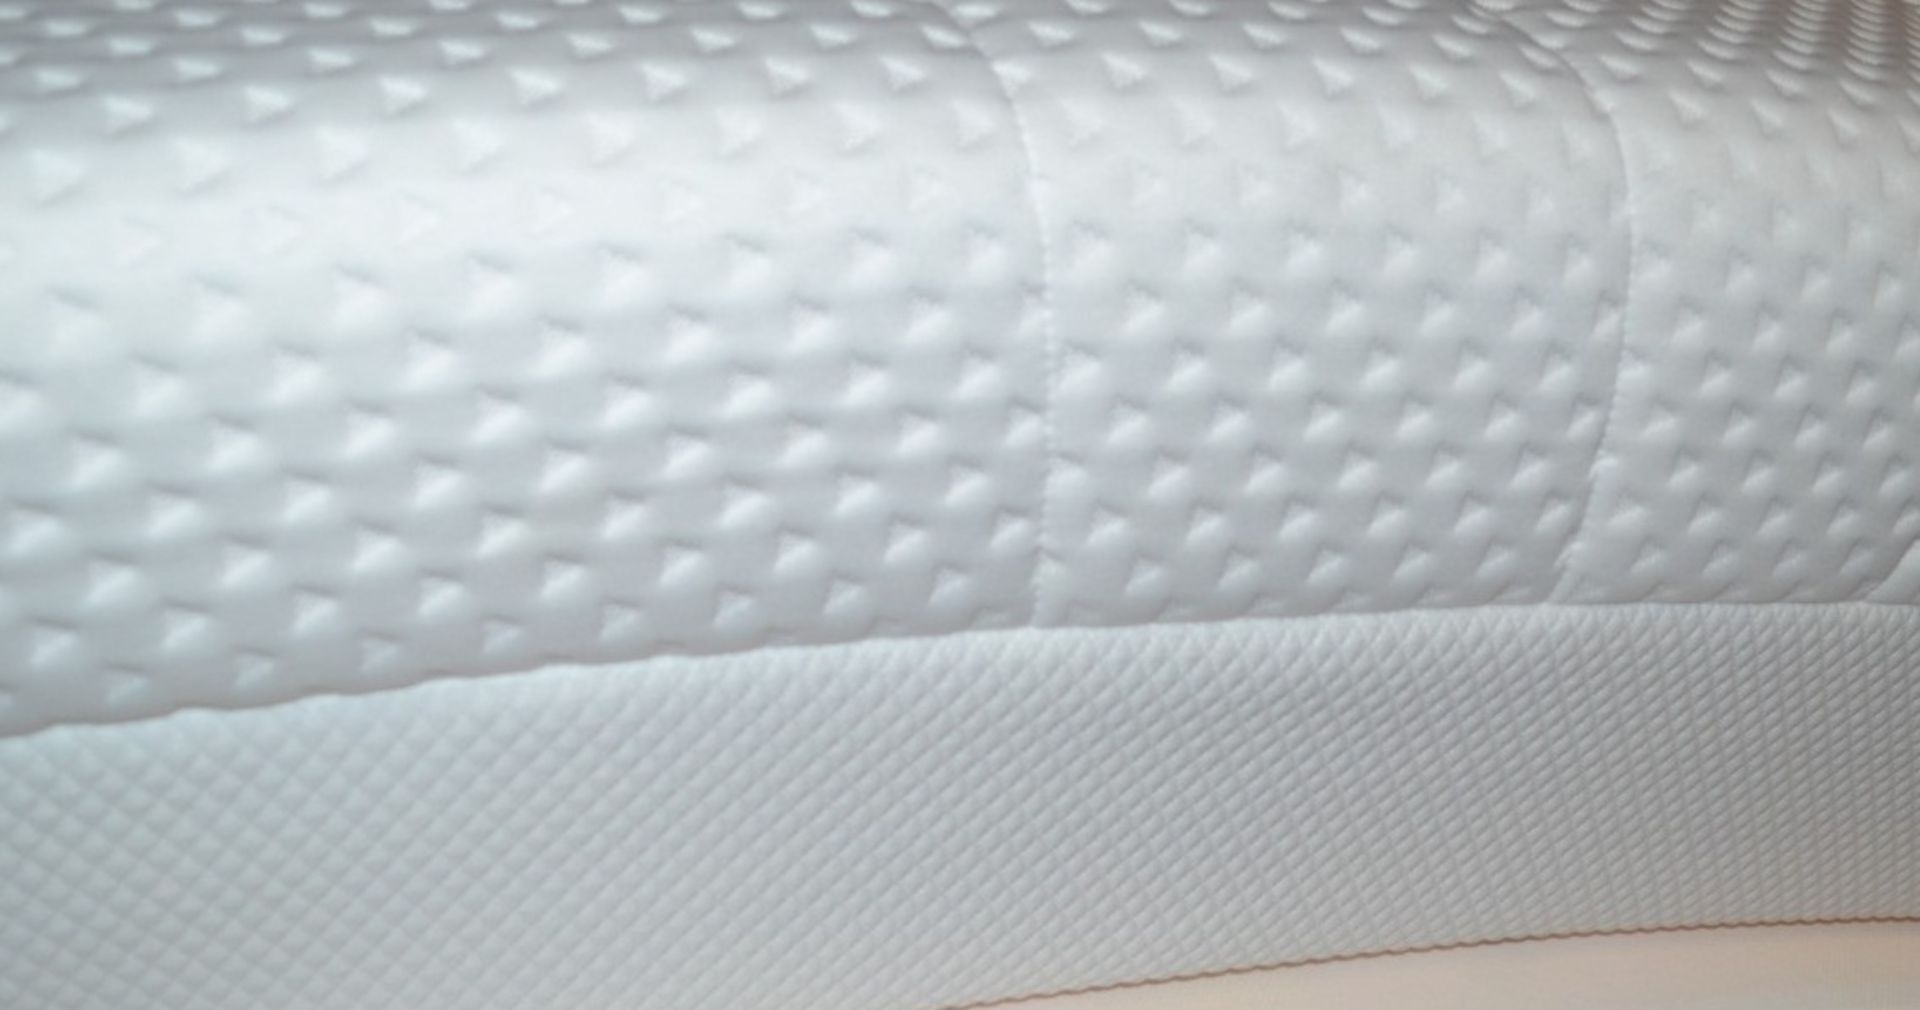 2 x TEMPUR Deluxe Ardennes Mattresses - Dimensions: 75x200cm - Ref: 5355150 P3 *More Details and - Image 4 of 5